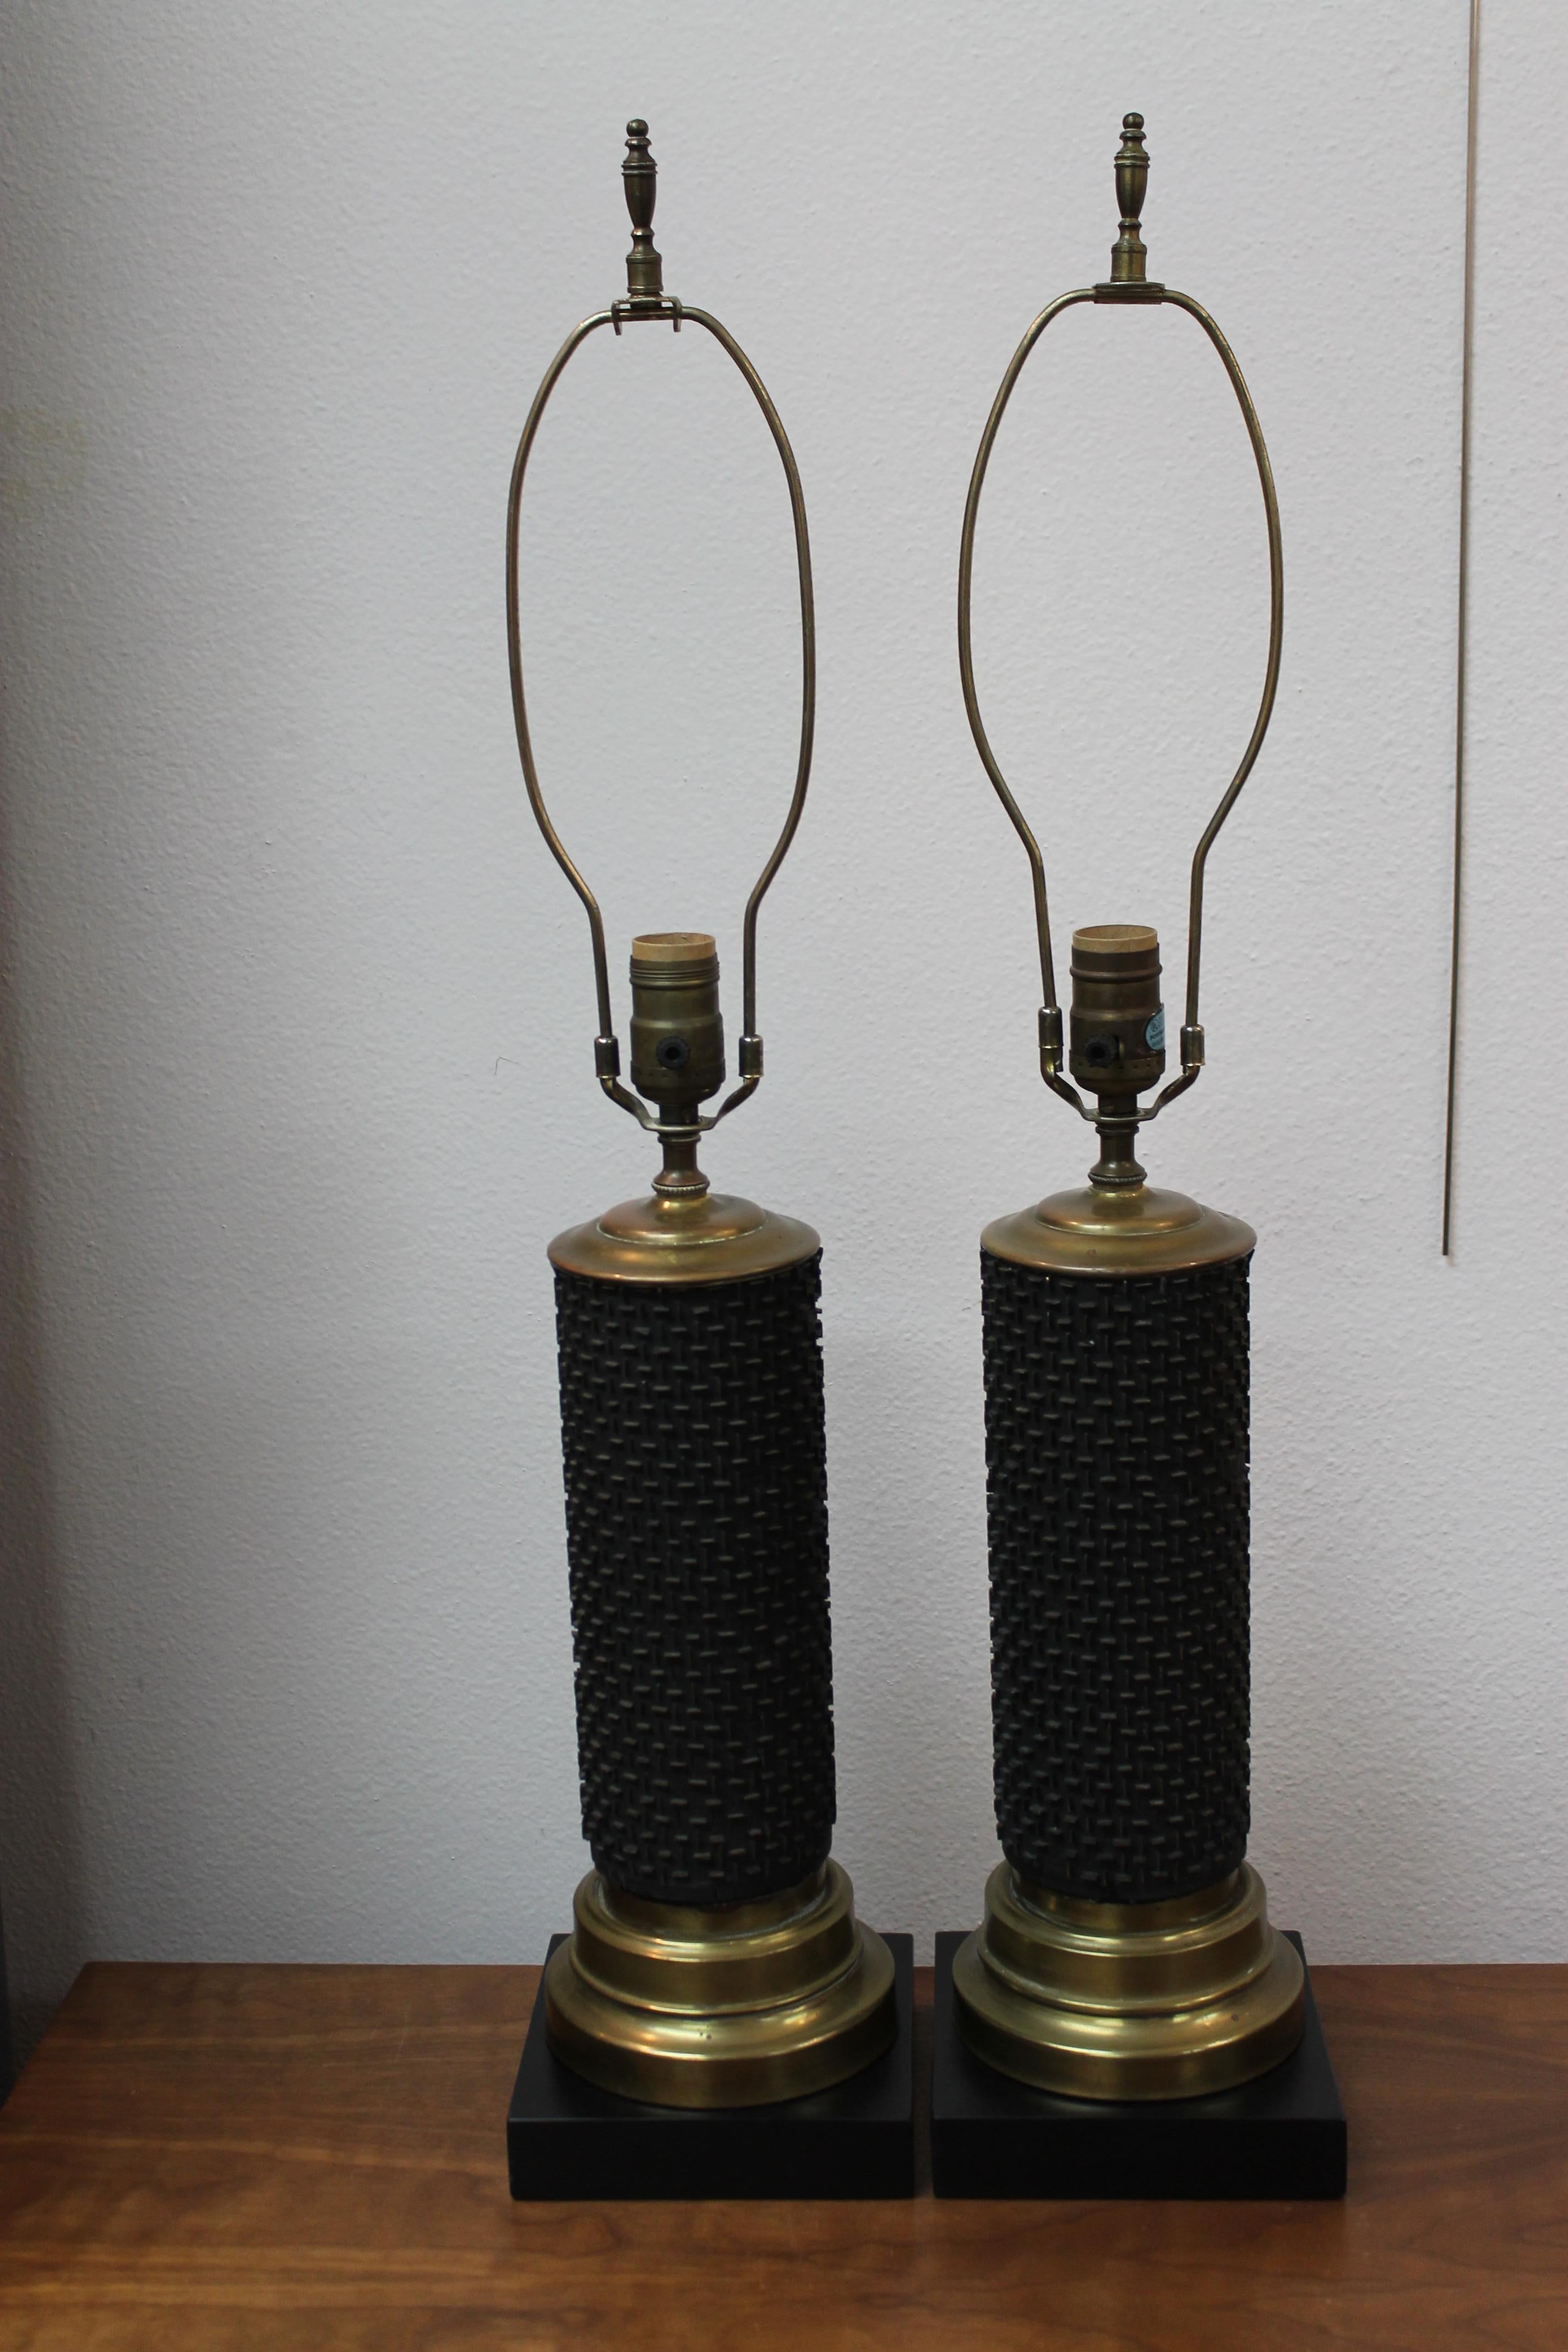 A matched pair of circa 1950s wallpaper print roller lamps, matte black with raised brass bars. Handsome horizontal / vertical pattern. These lamps are 16